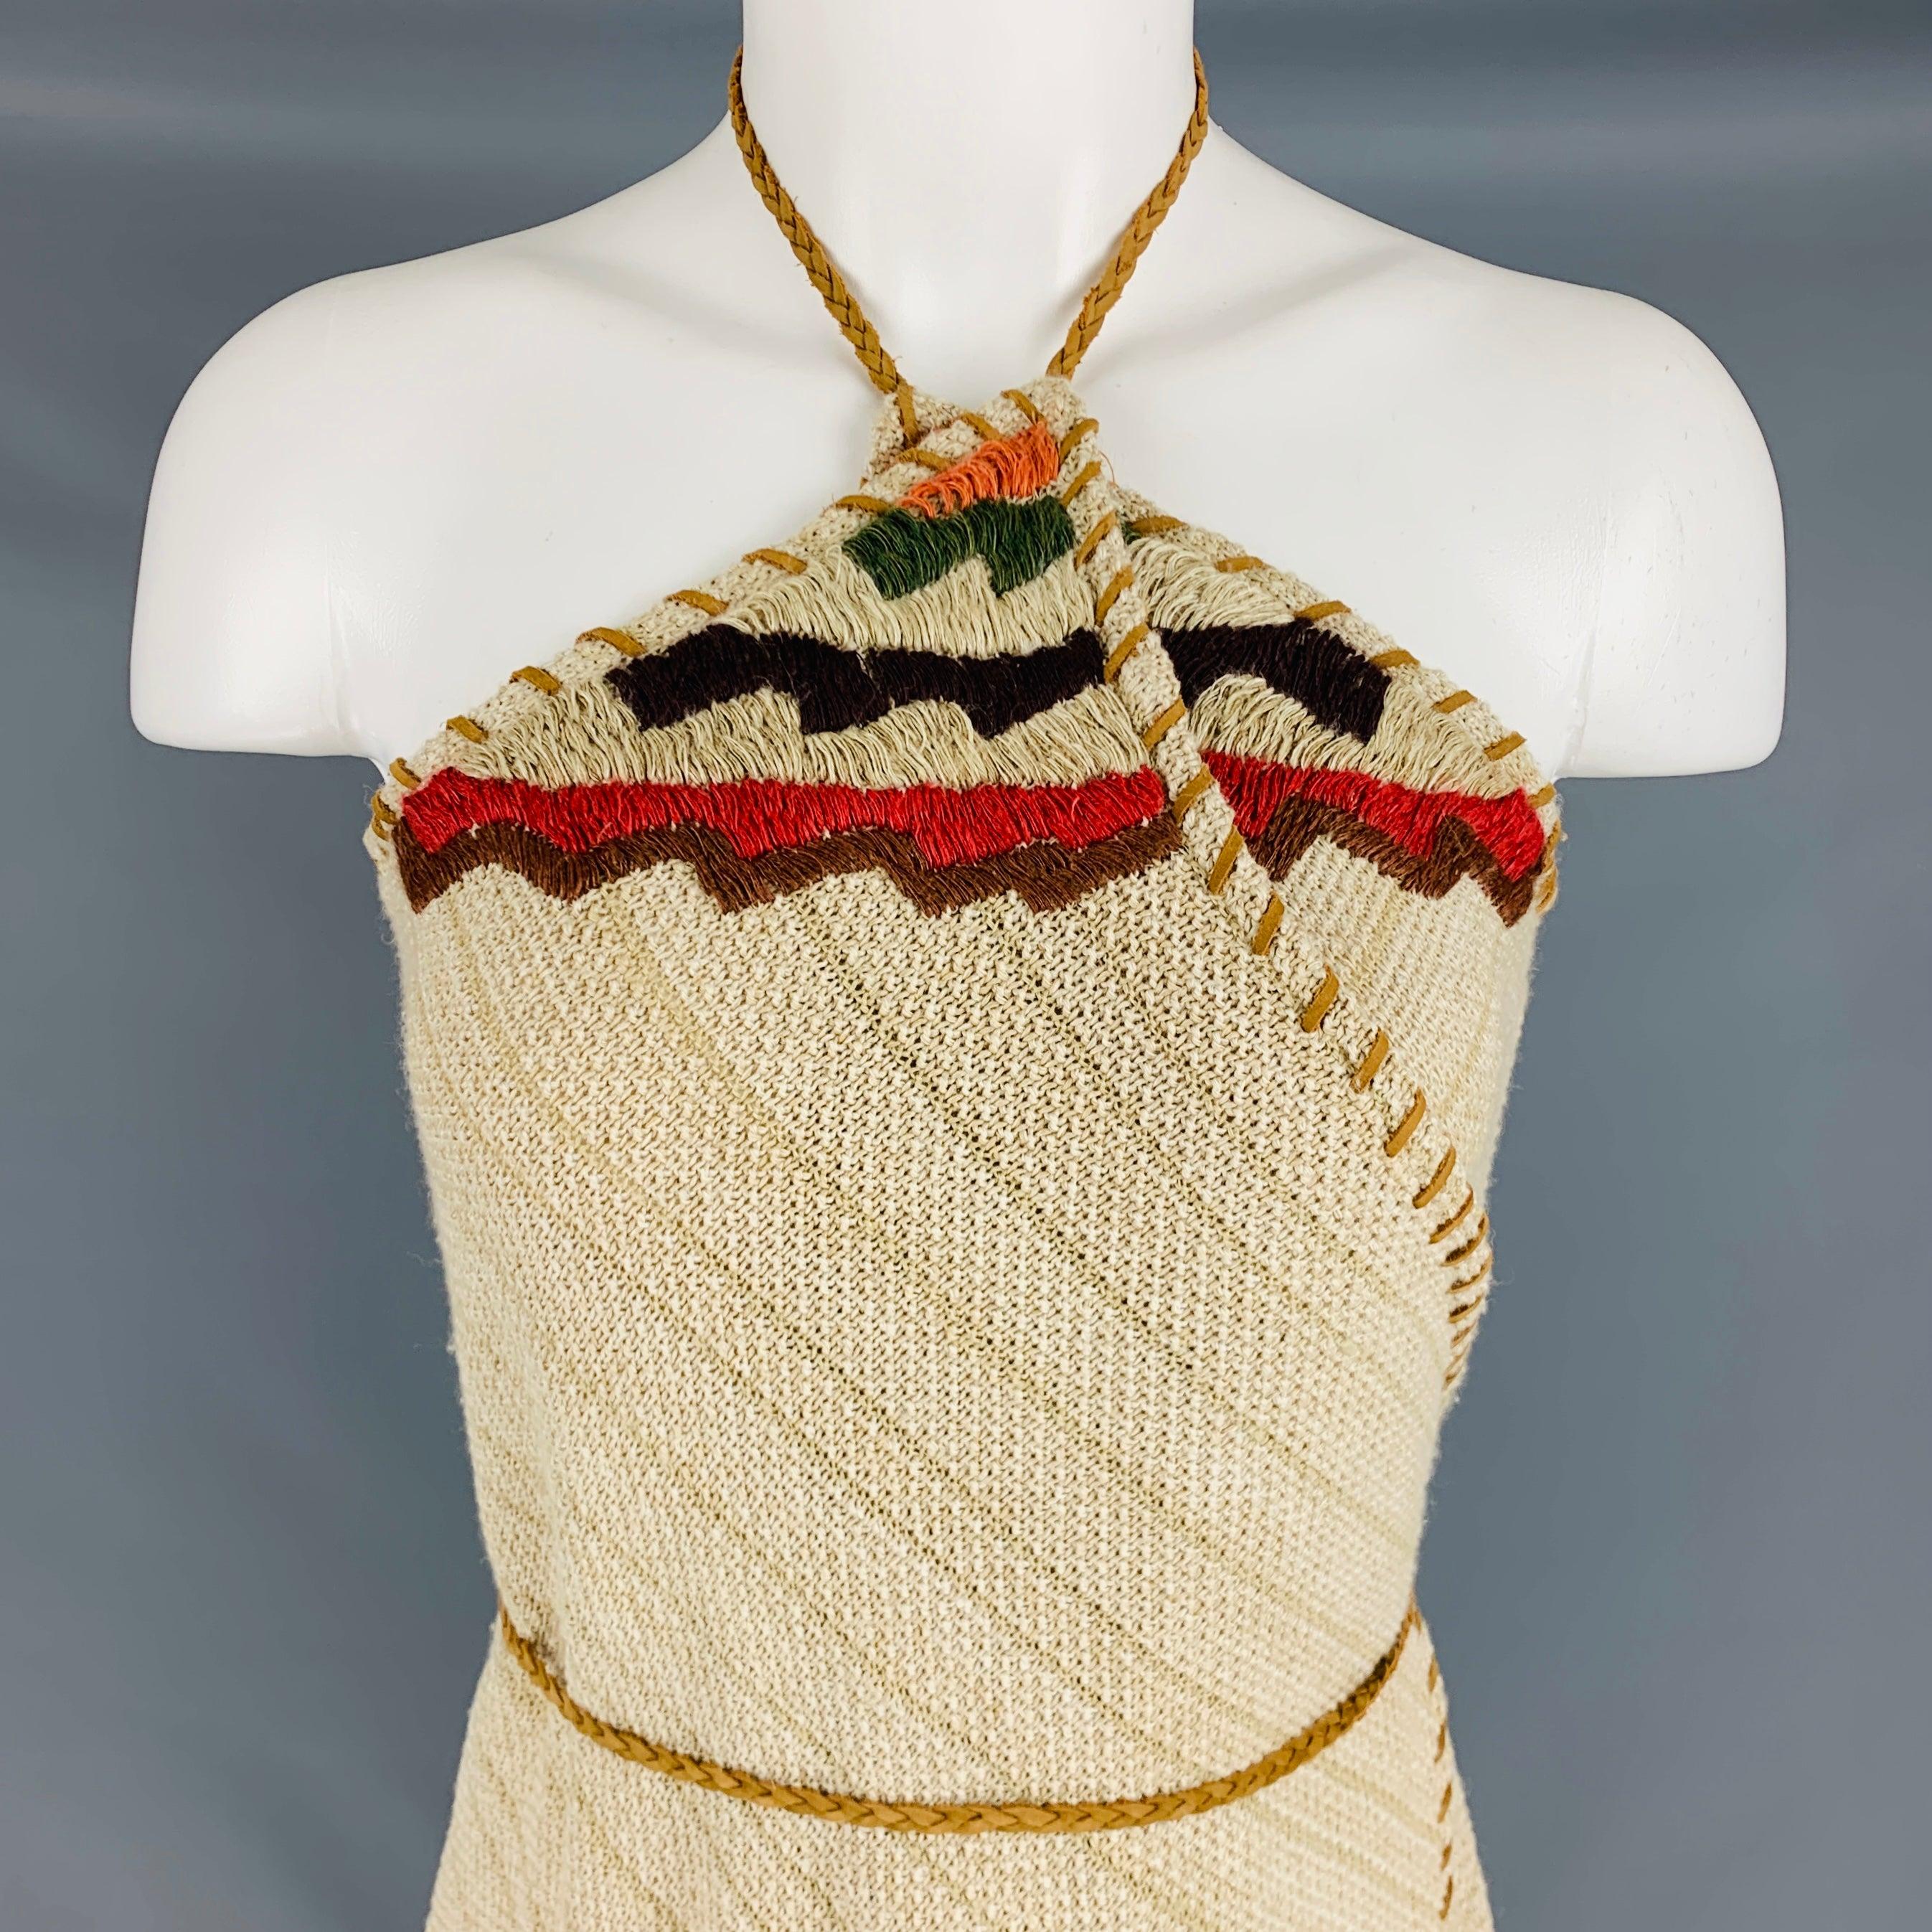 RALPH LAUREN dress
in a beige linen blend knit featuring Navajo leather trim, halter style, multi-color stripe pattern, and tie closure. This item comes as one large piece of fabric, which is then wrapped around the body for a variety of versatile